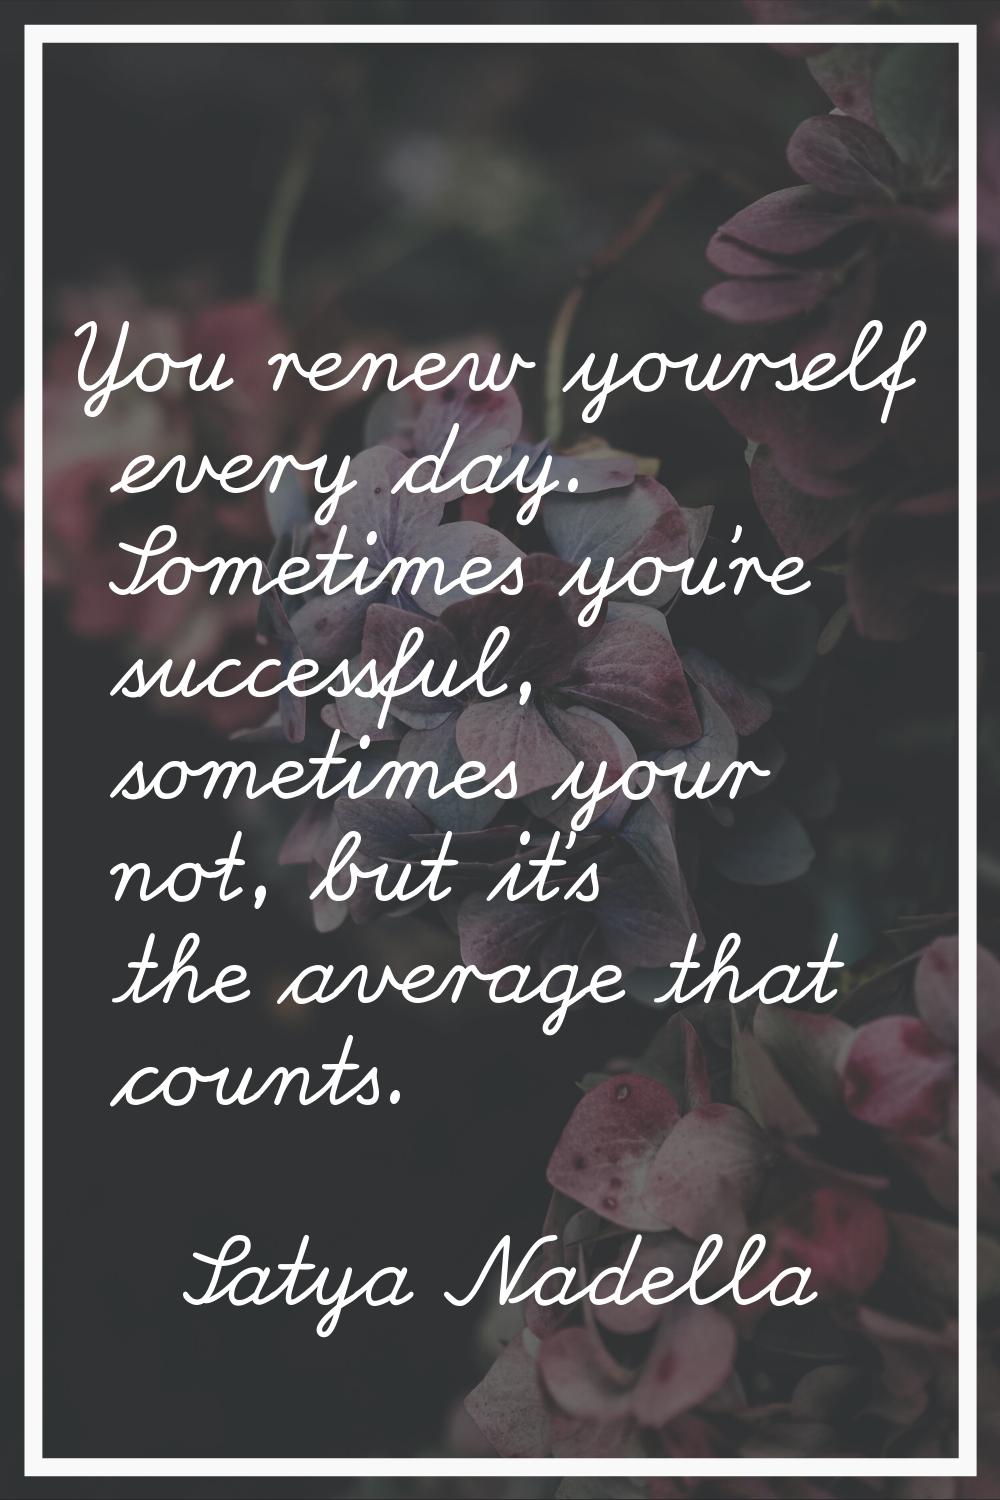 You renew yourself every day. Sometimes you're successful, sometimes your not, but it's the average